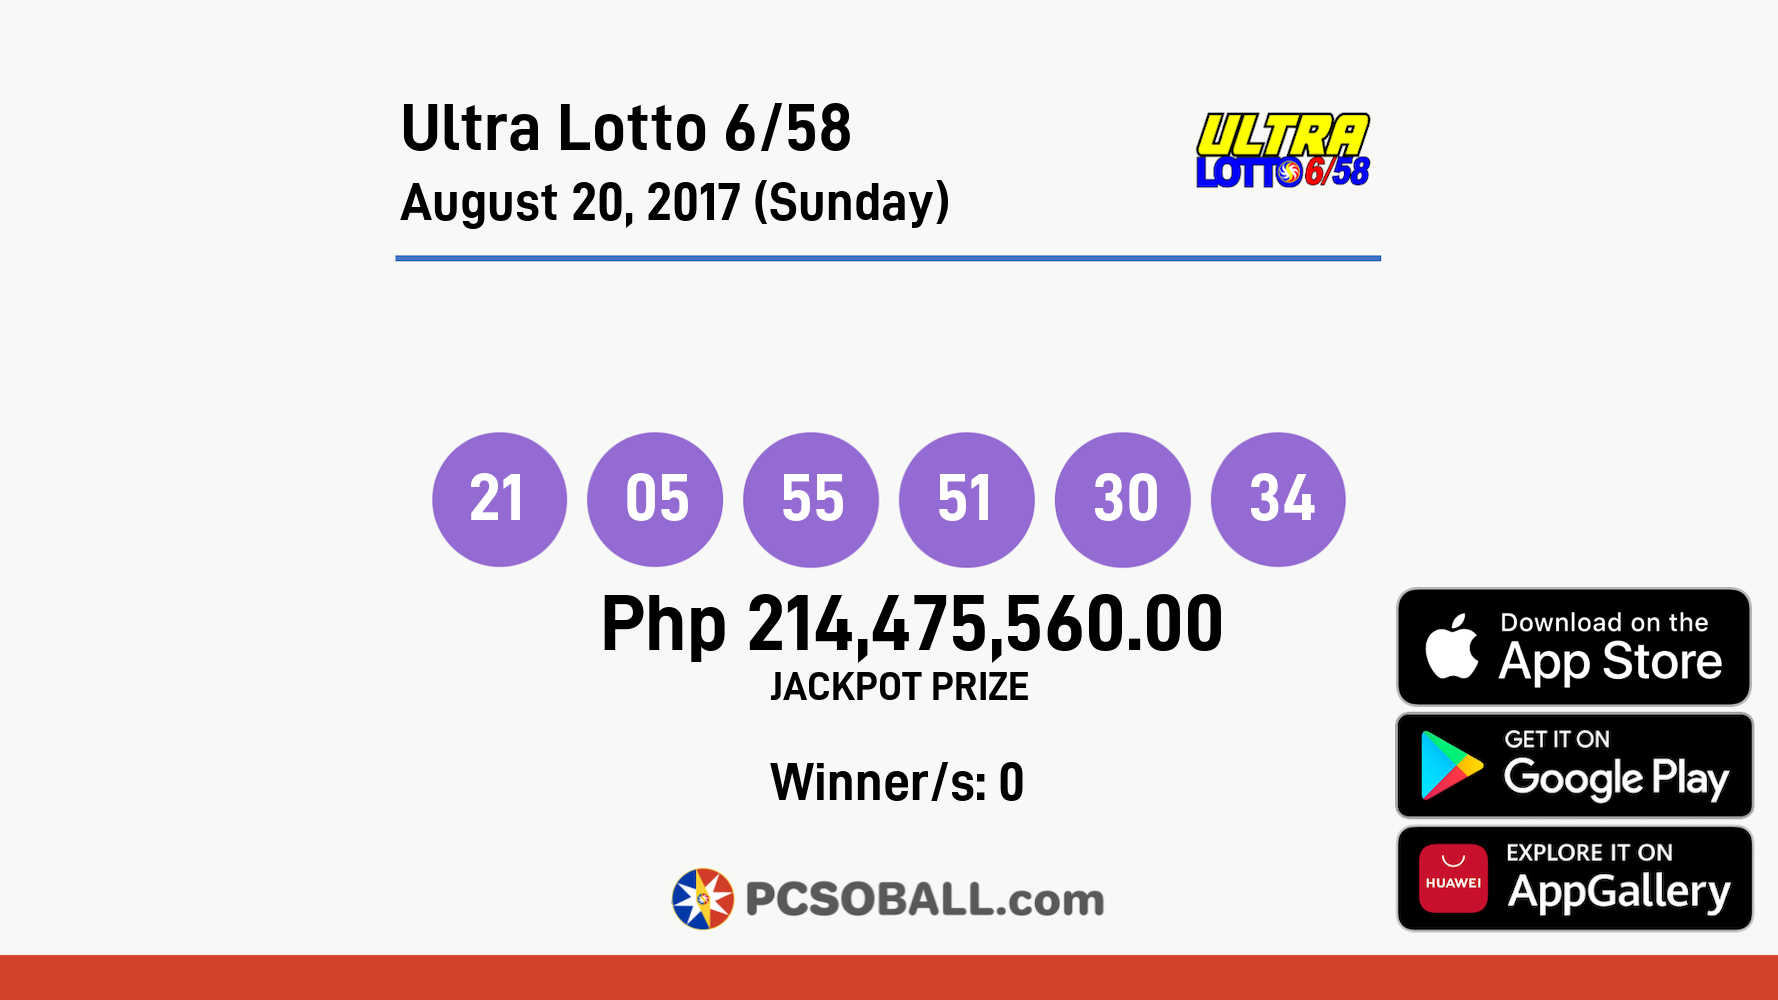 Ultra Lotto 6/58 August 20, 2017 (Sunday) Result